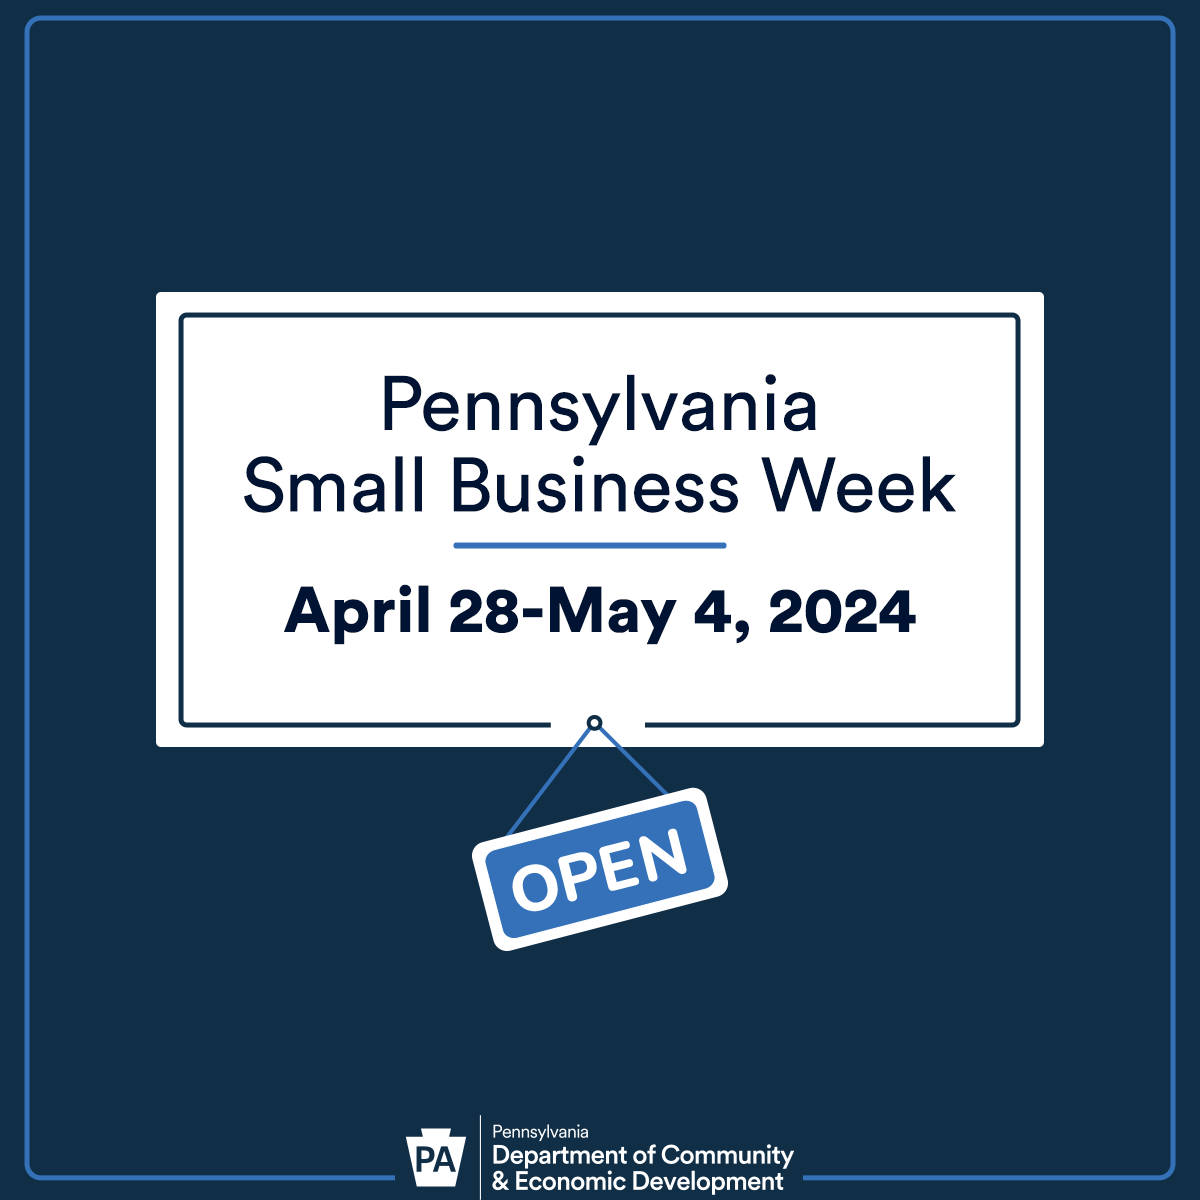 Nothing beats sharing a smile with our neighbors working at local small businesses.️ Shop small, keep your money local and watch it make a difference.

Celebrating PA Small Business Week

sbdc.duq.edu/PA-Small-Busin….

#PASmallBiz24 #dusbdc #pasbdc